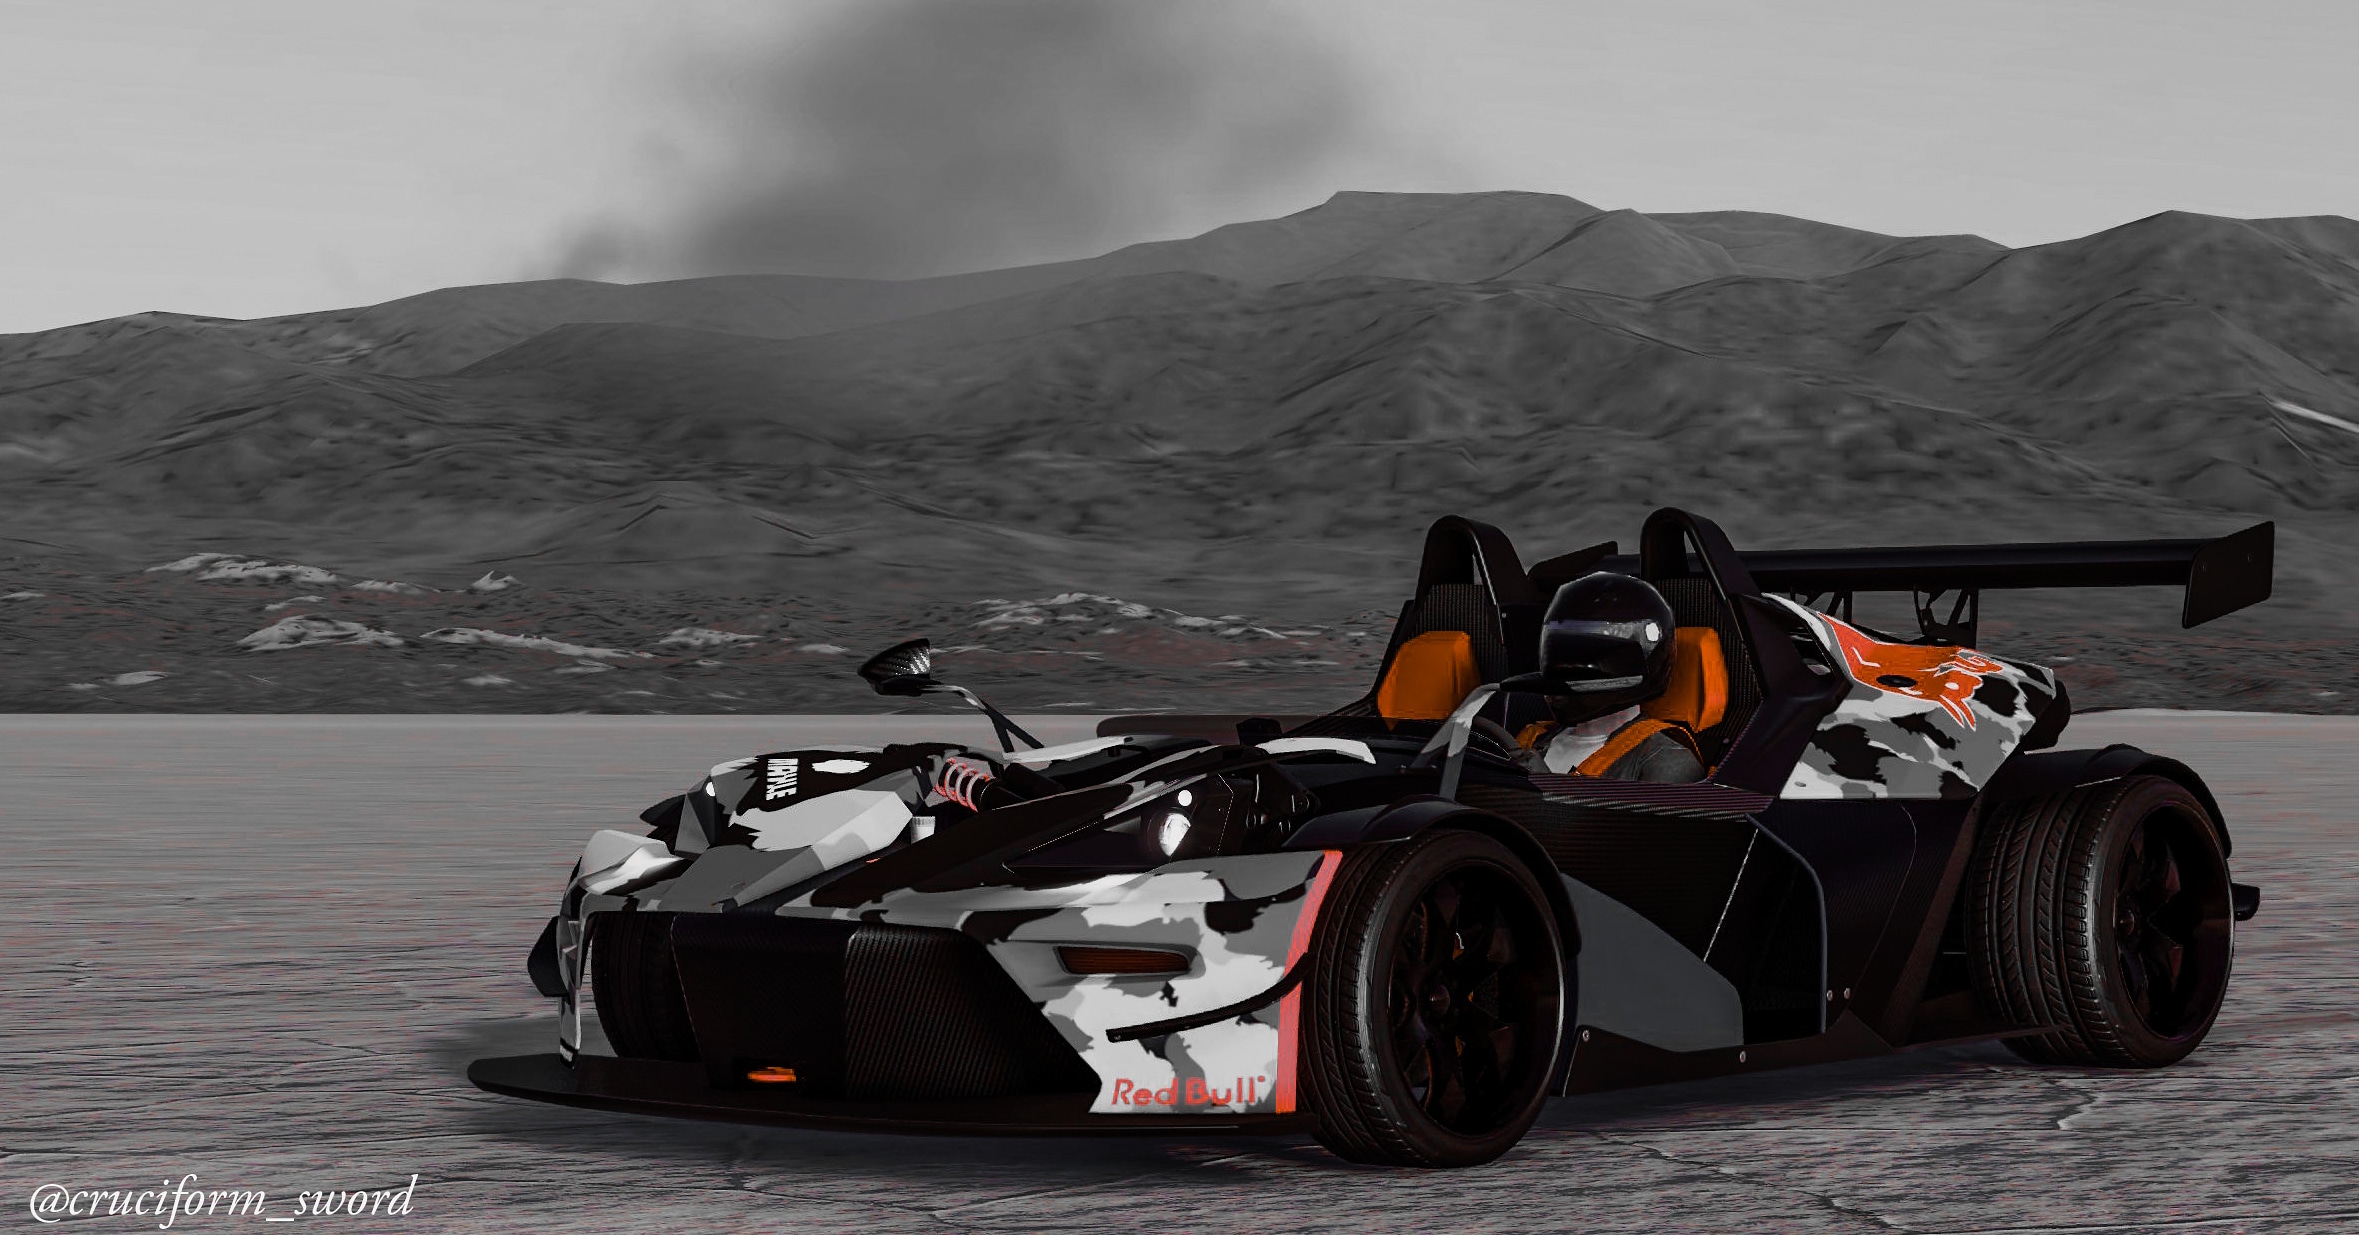 In Game The Crew 2 KTM X Bow Vehicle Screen Shot Games Posters Video Games Photography Monochrome 2359x1235